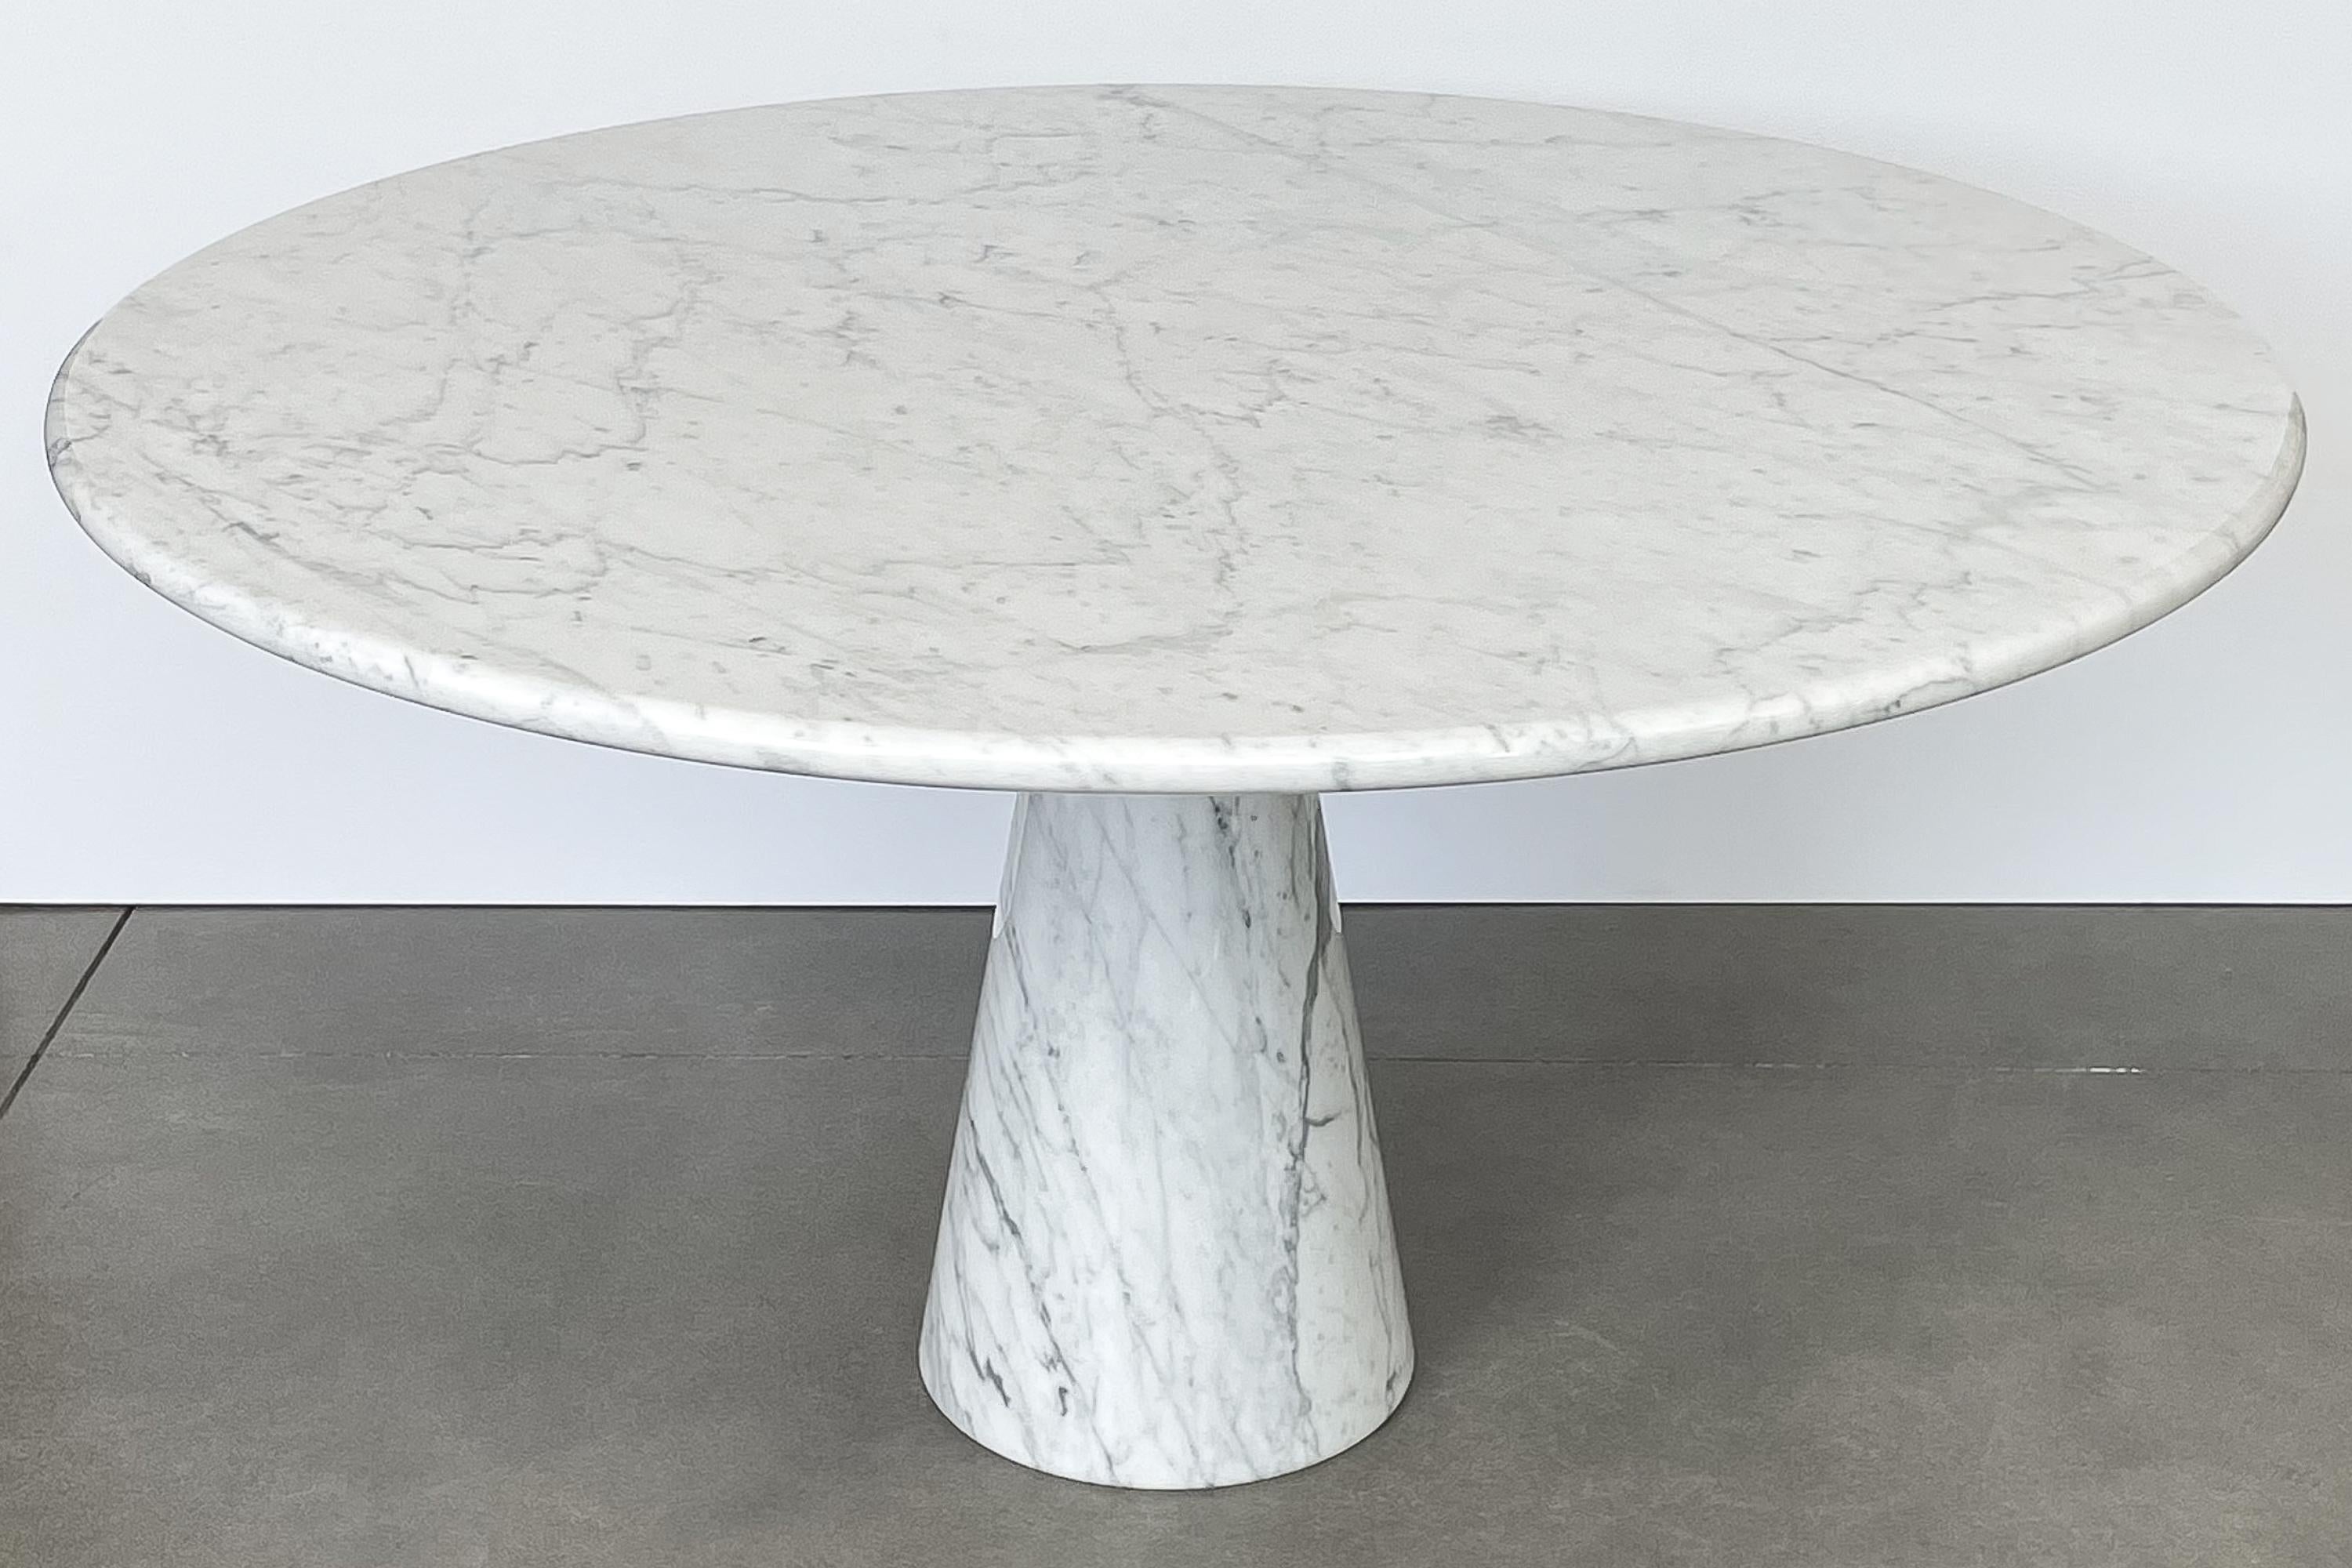 Polished Angelo Mangiarotti White Carrara Marble M1 Dining Table for Skipper